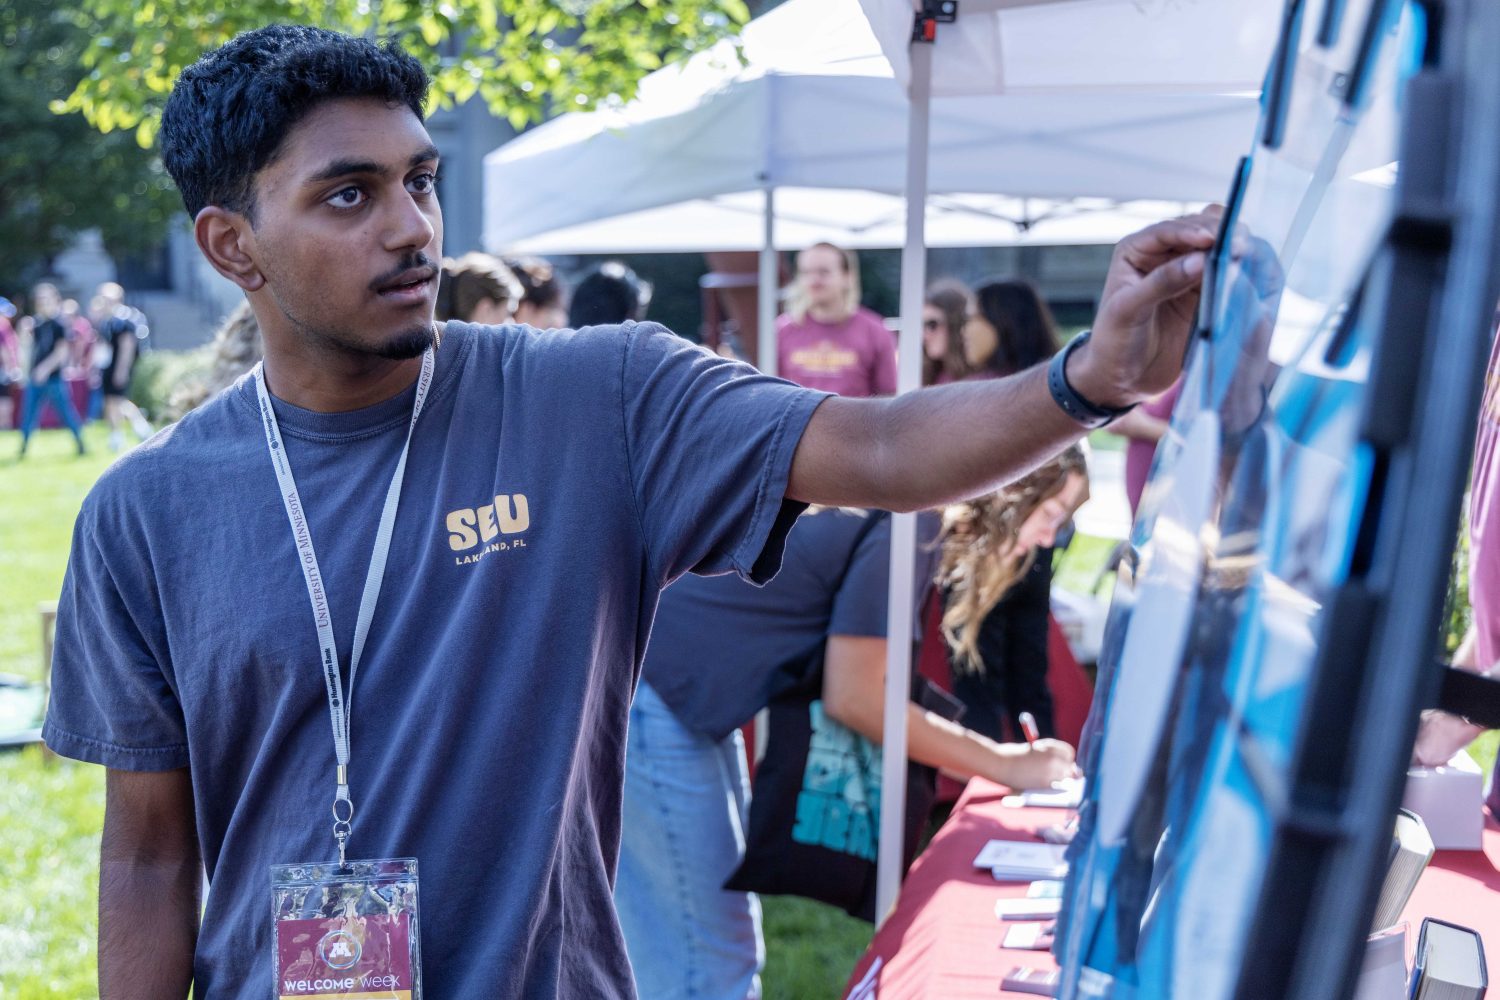 Students spin the wheel for a challenge and prize at the Libraries' table for Welcome Week. (Photo/Adria Carpenter)